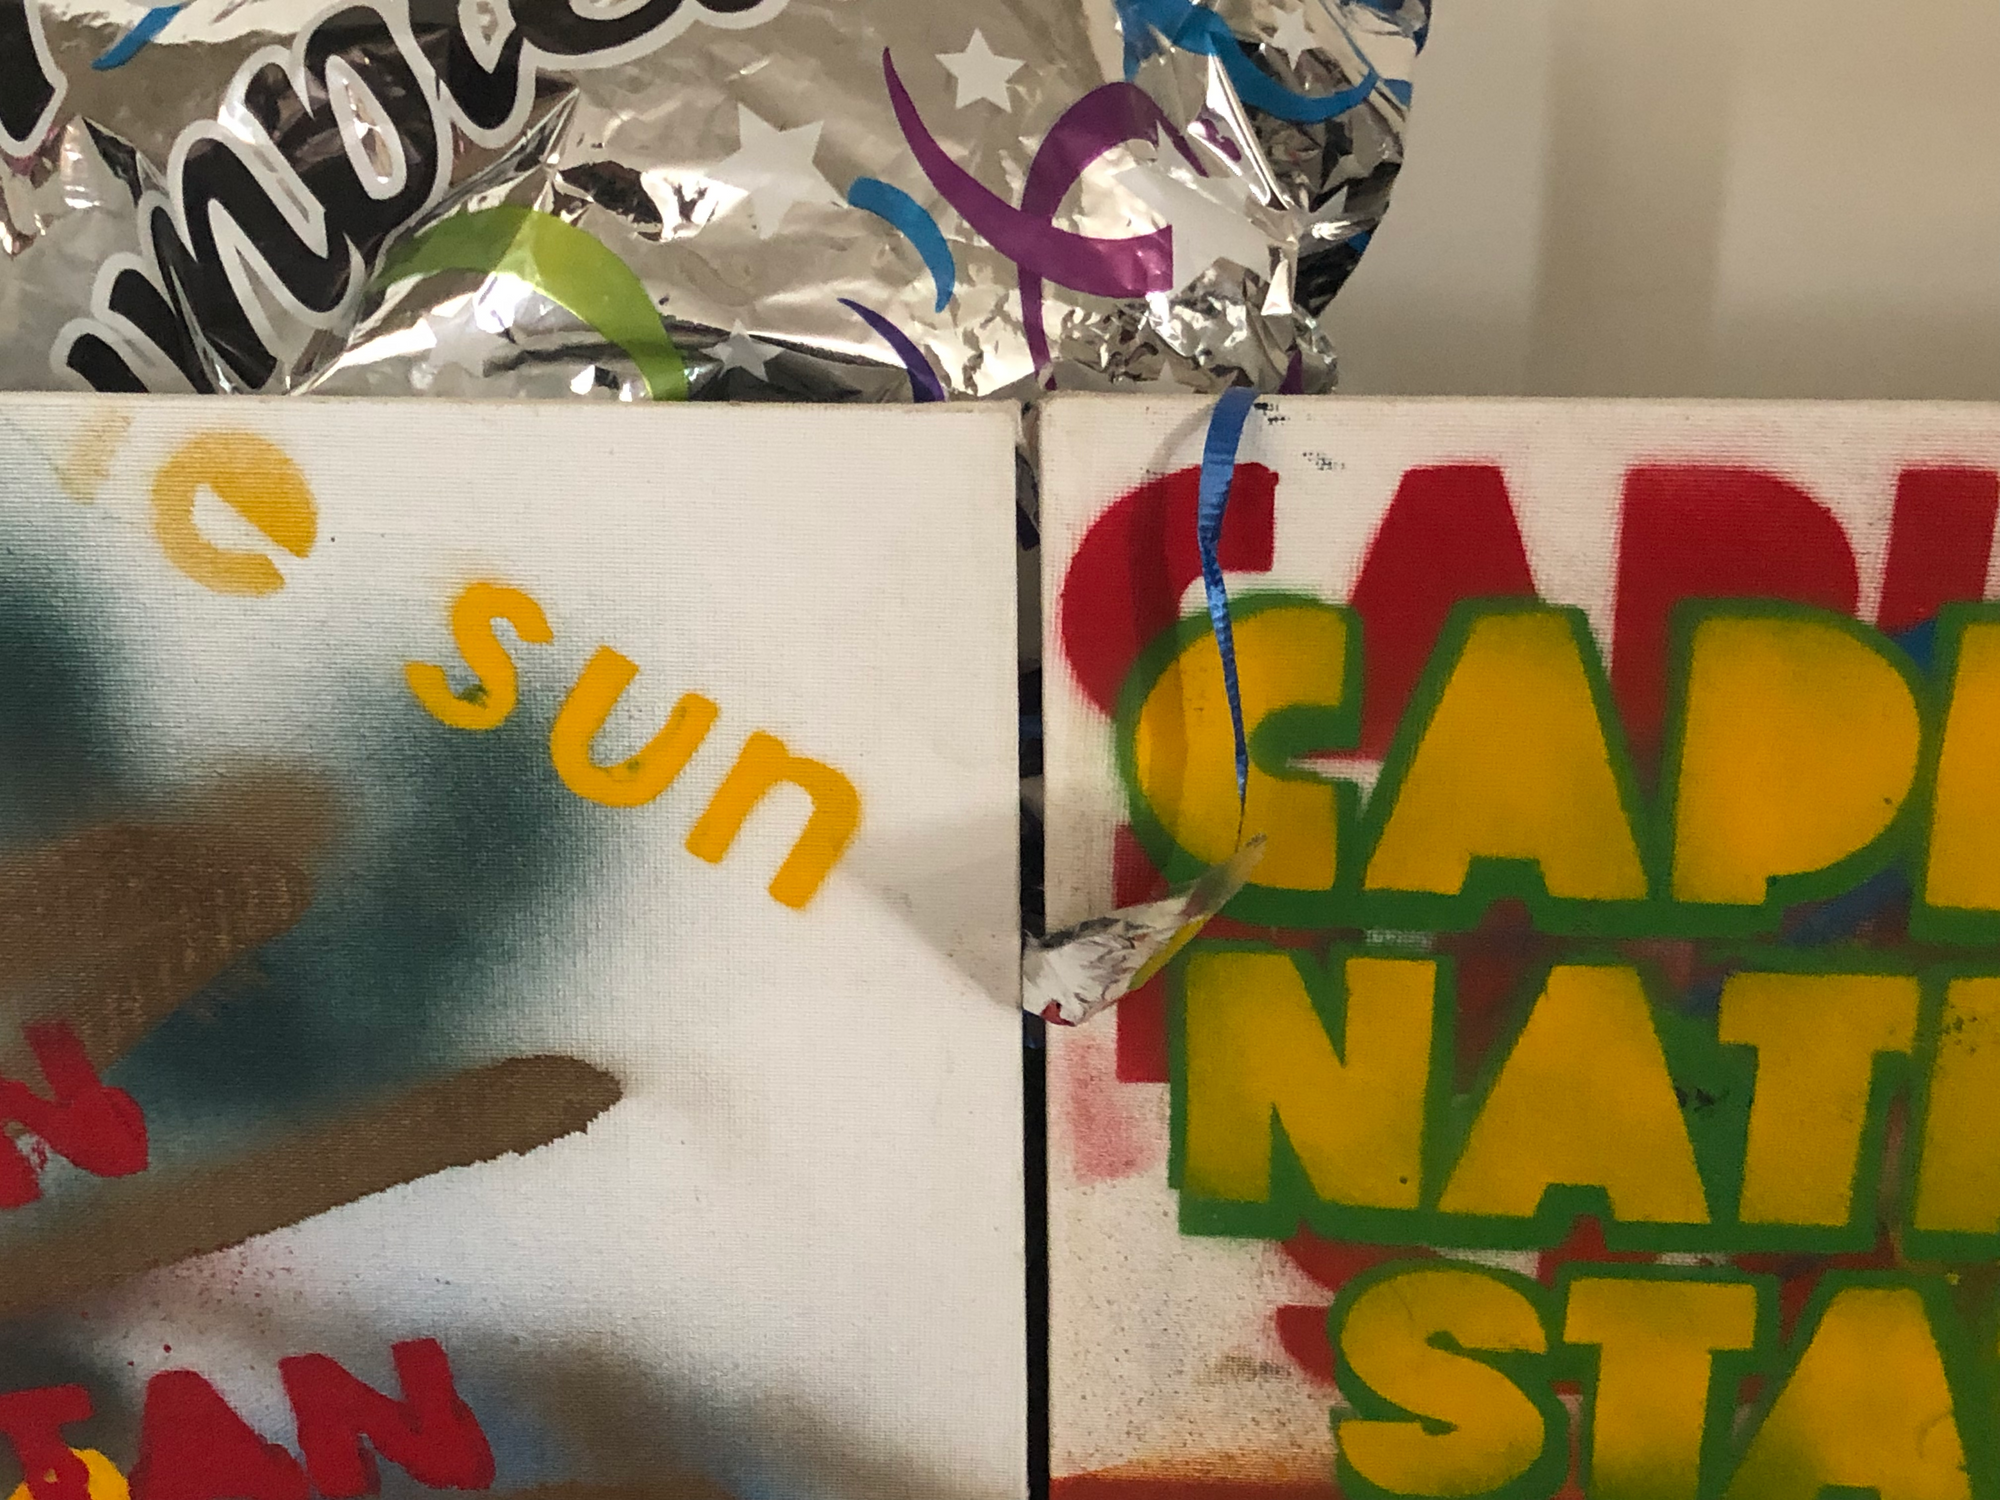 photo of two large canvasses, the top corners visible, the left canvas with dark green and brown streaks, and the letters "e sun" in yellow and "N" and "TAN" in red, the right canvas with the letters "CAPI", "NATI", and "STA" in yellow letters with green outlines, the same letters in red behind, offset. hanging over the canvasses is a blue string attached to a silver celebratory balloon. taken at the robledo art, strike! headquarters, february 2023.